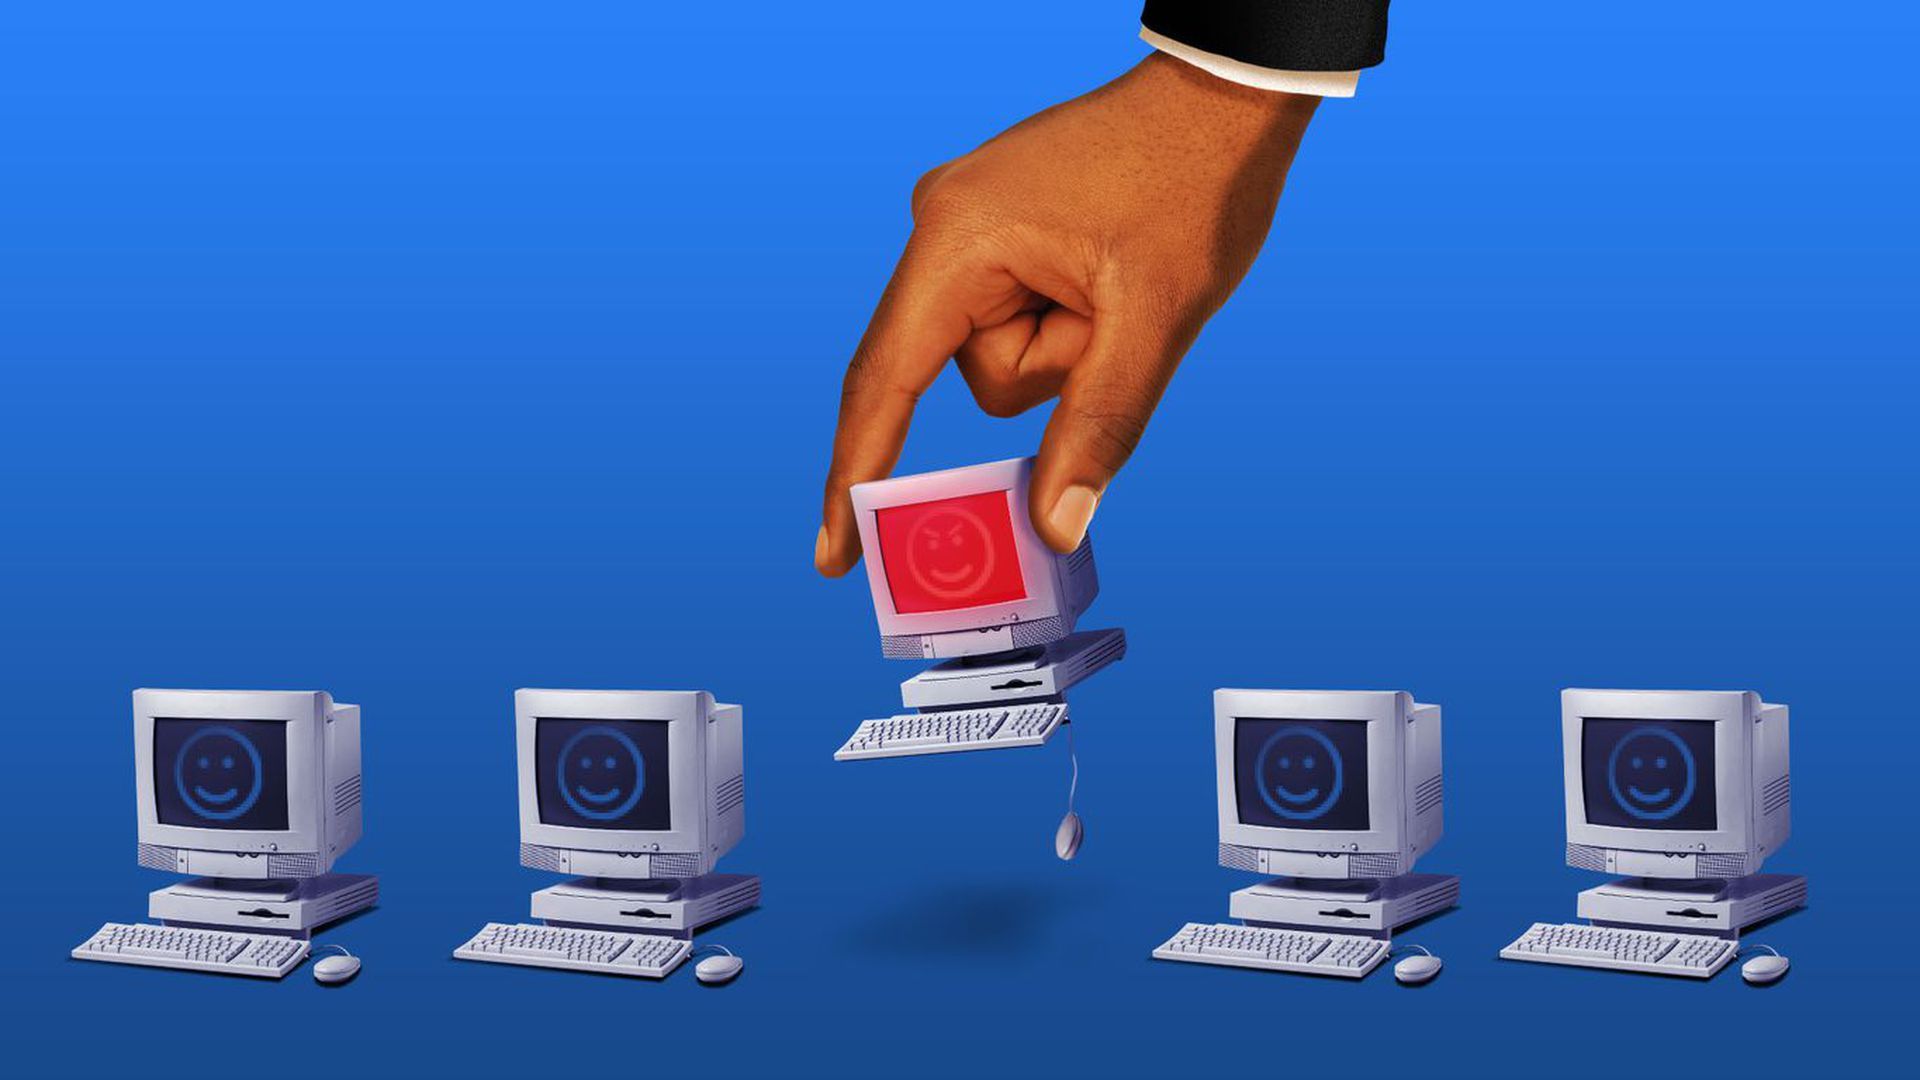 A photo illustration of computers with smiley faces against a blue background as one computer with a red background is picked up by a hand